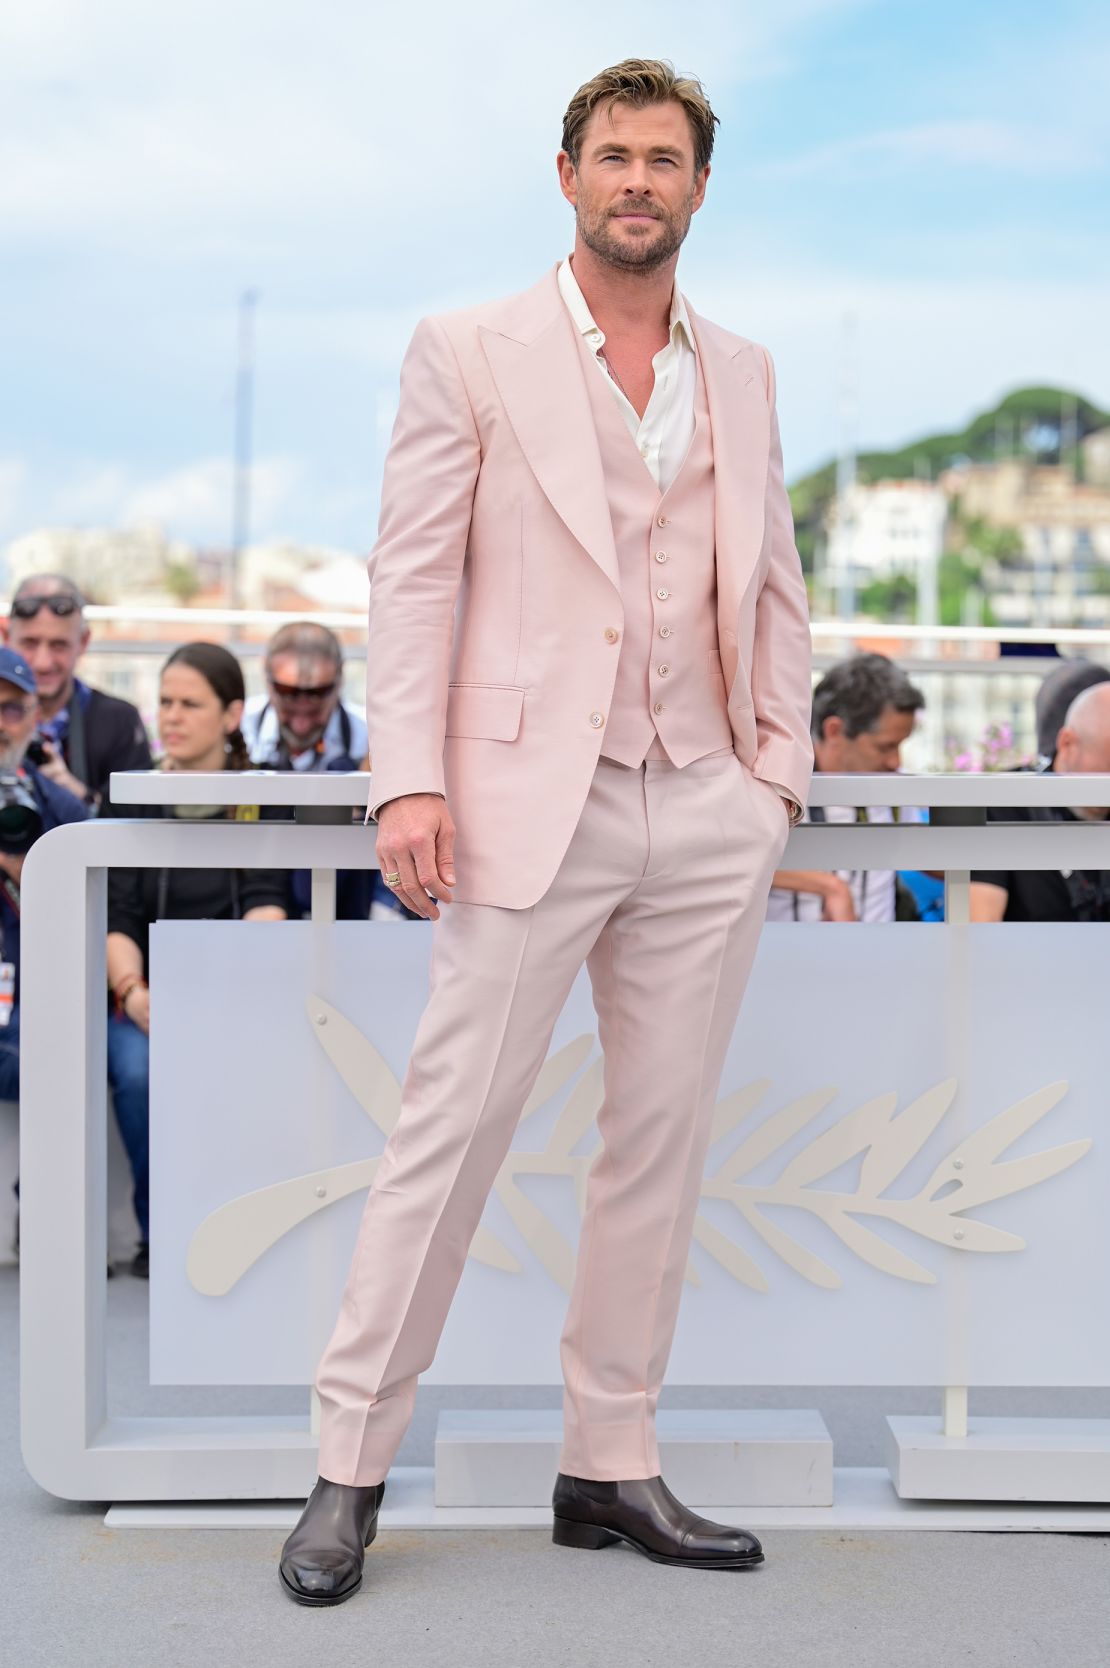 Chris Hemsworth in Tom Ford on May 16.